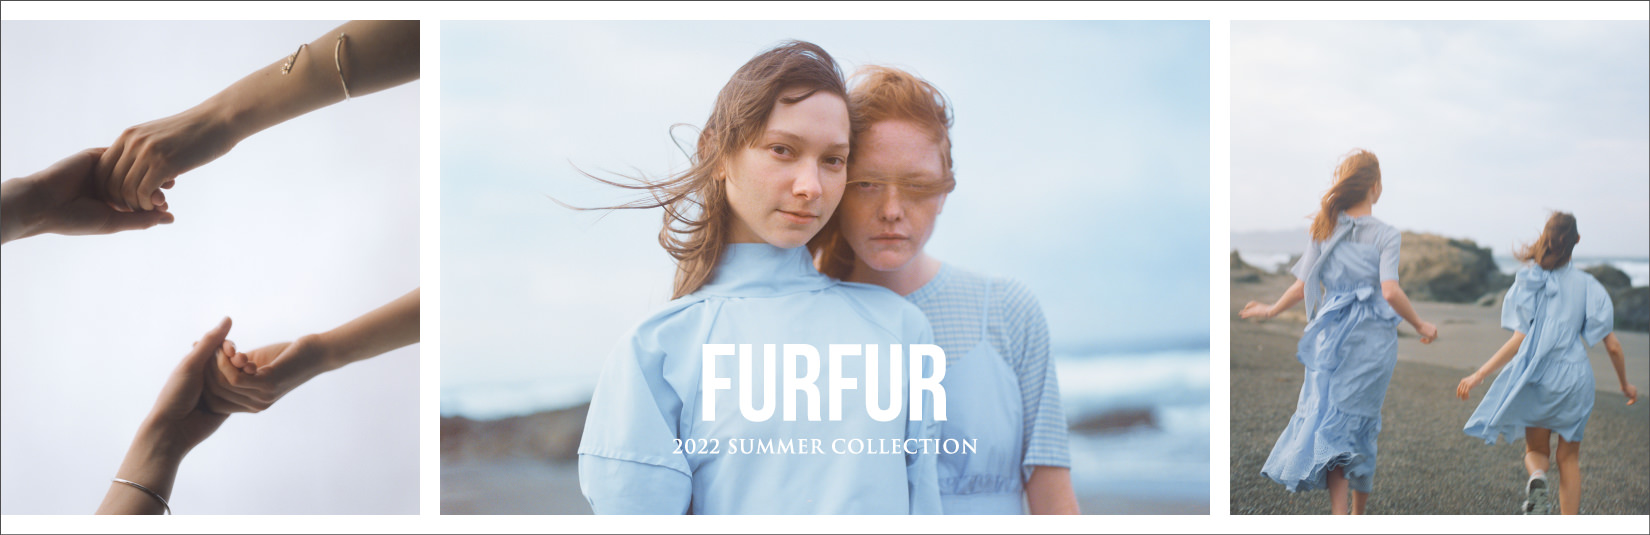 FURFUR 2022 Summer Collection 【DANCE WITH SUNNY】